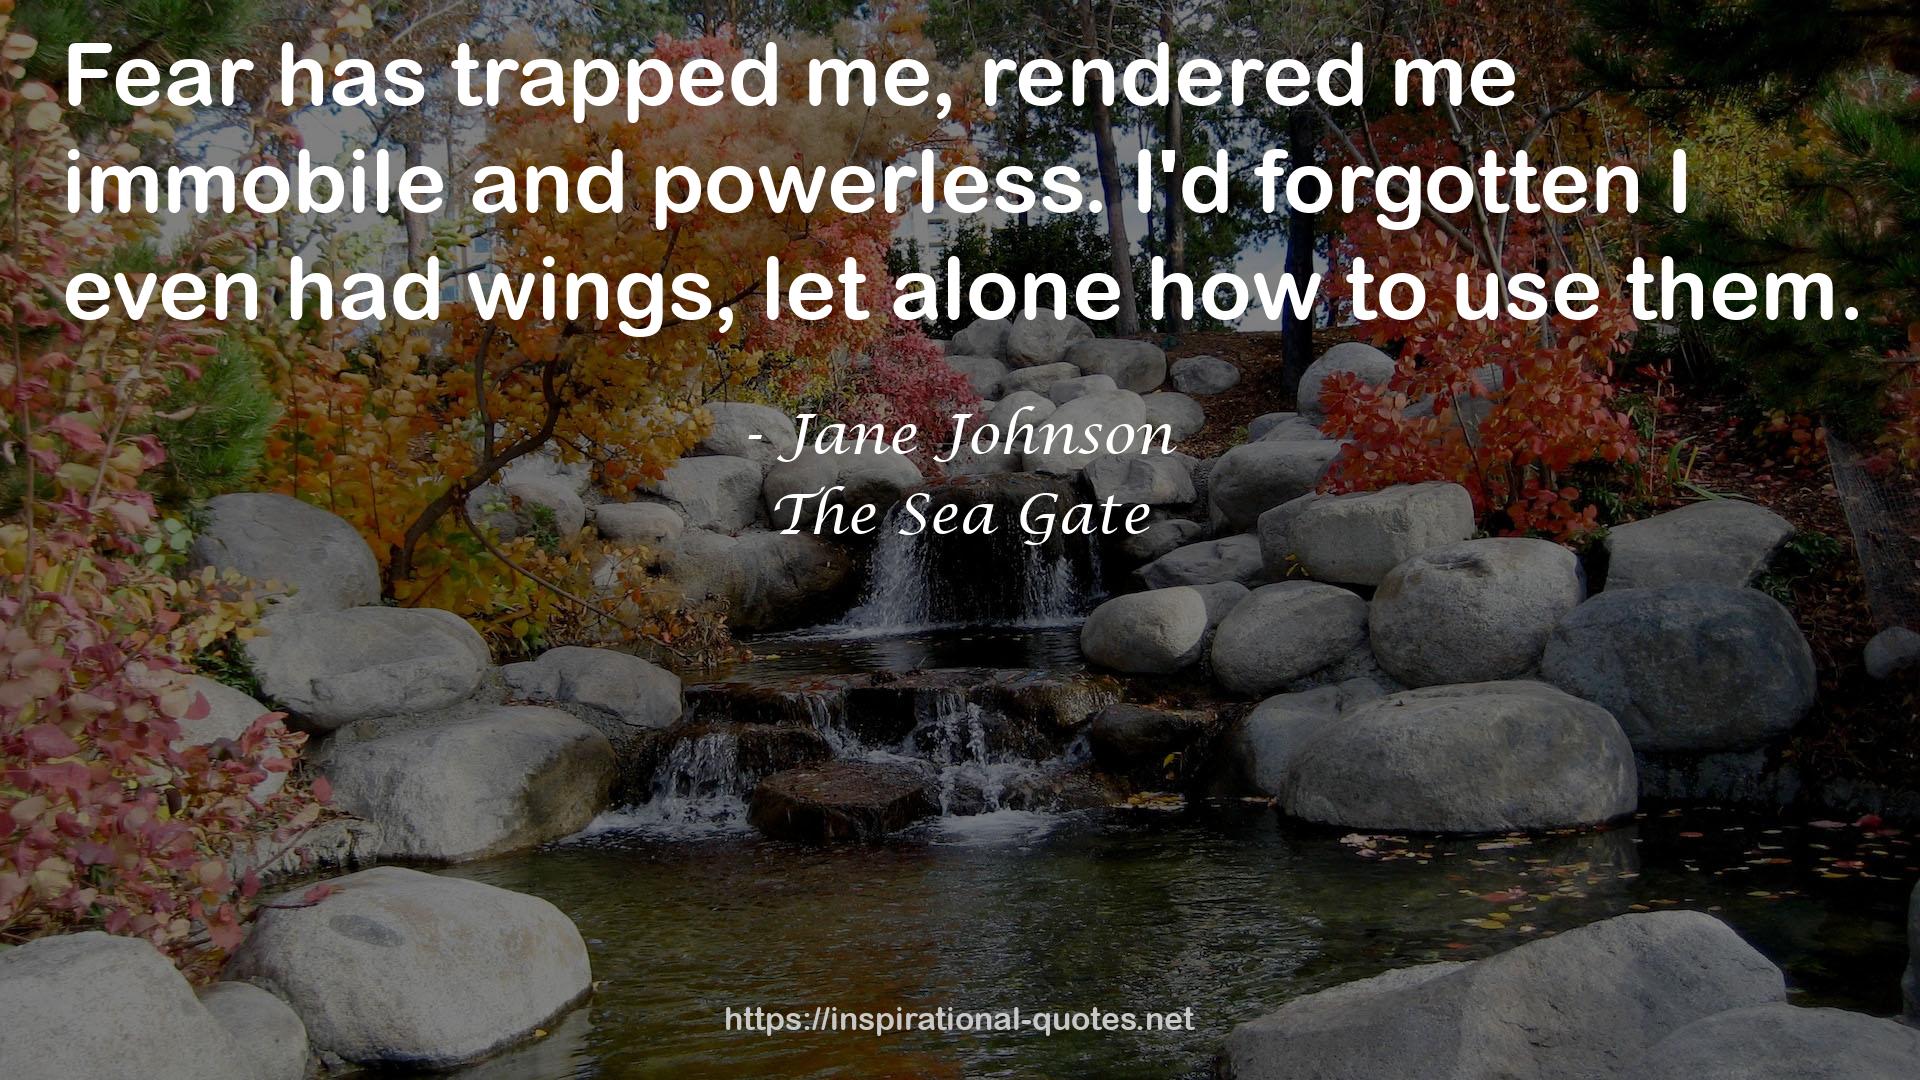 The Sea Gate QUOTES